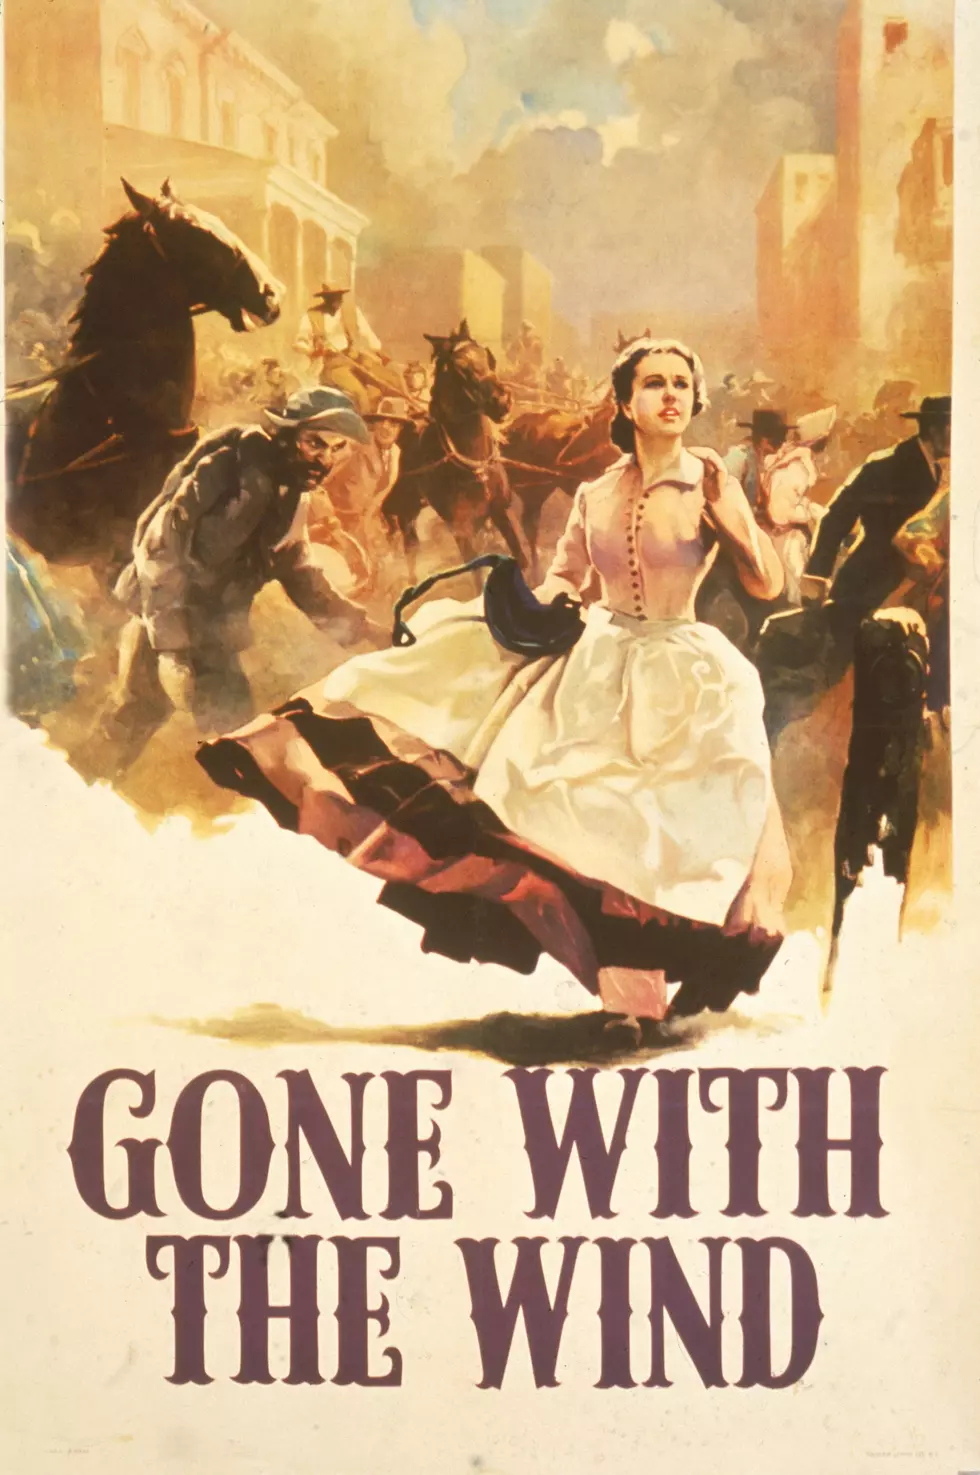 Today In History &#8211; &#8220;Gone With The Wind&#8221; published